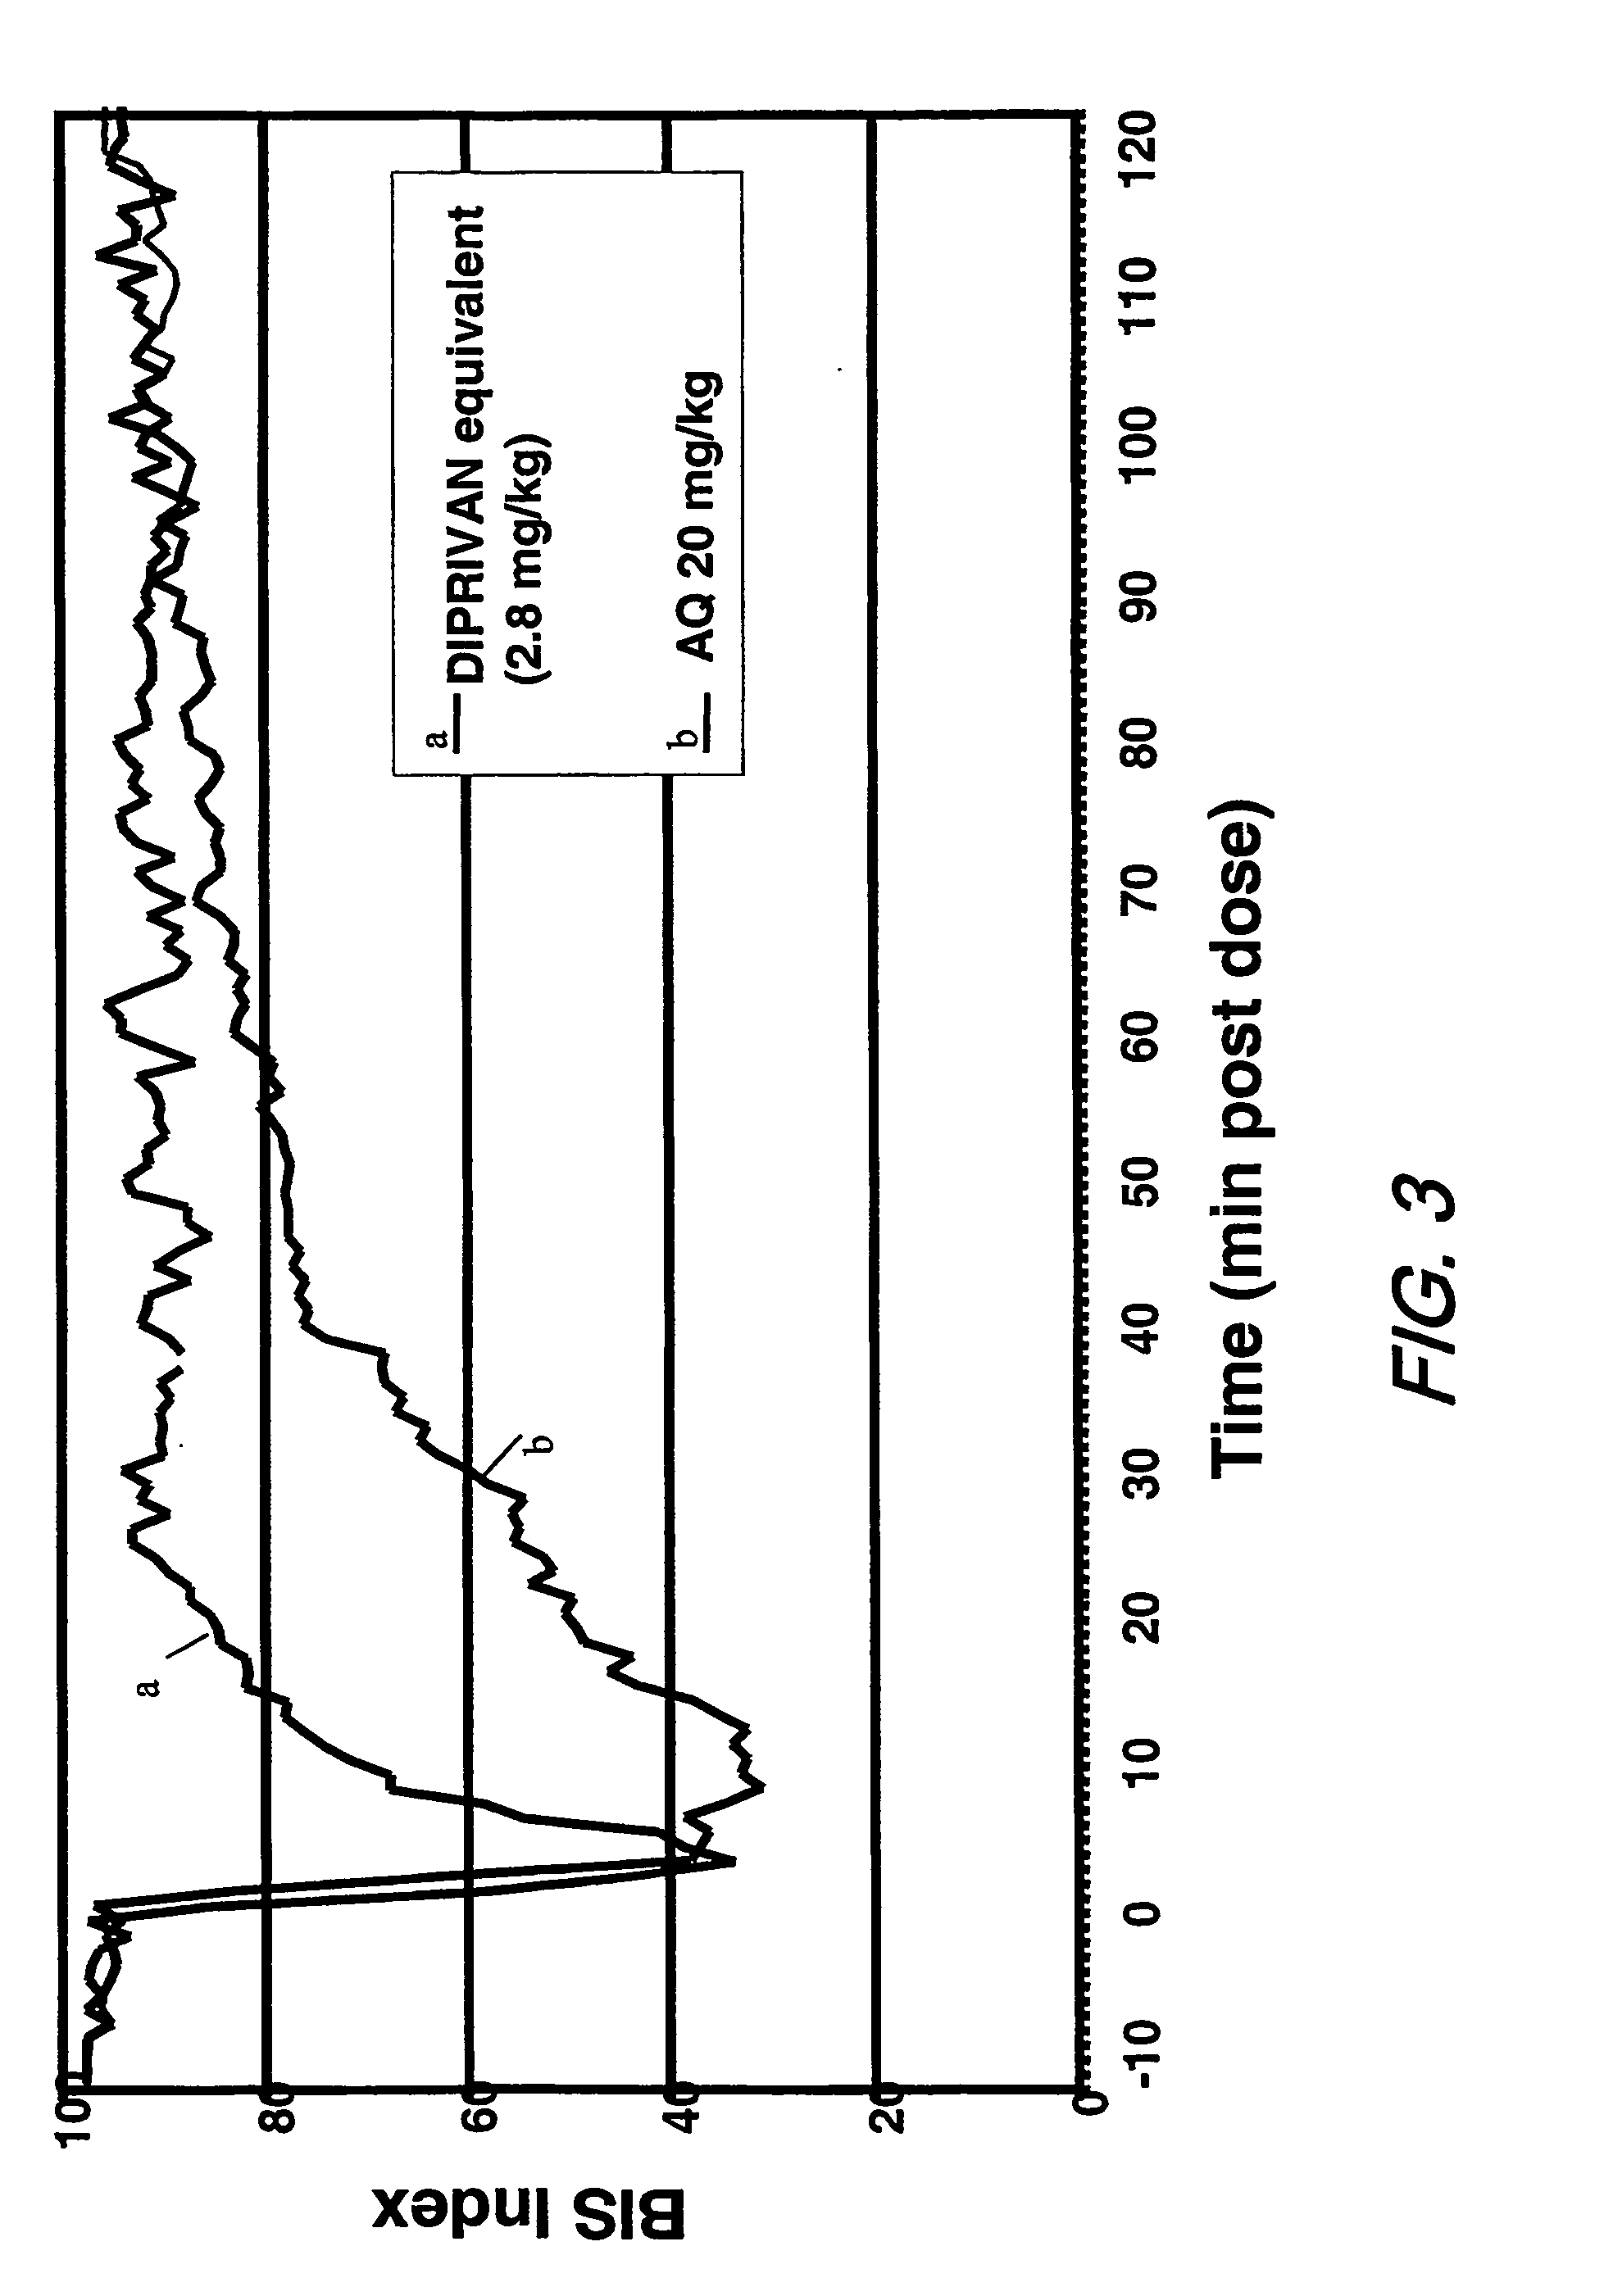 Pharmaceutical compositions containing water-soluble prodrugs of propofol and methods of administering same